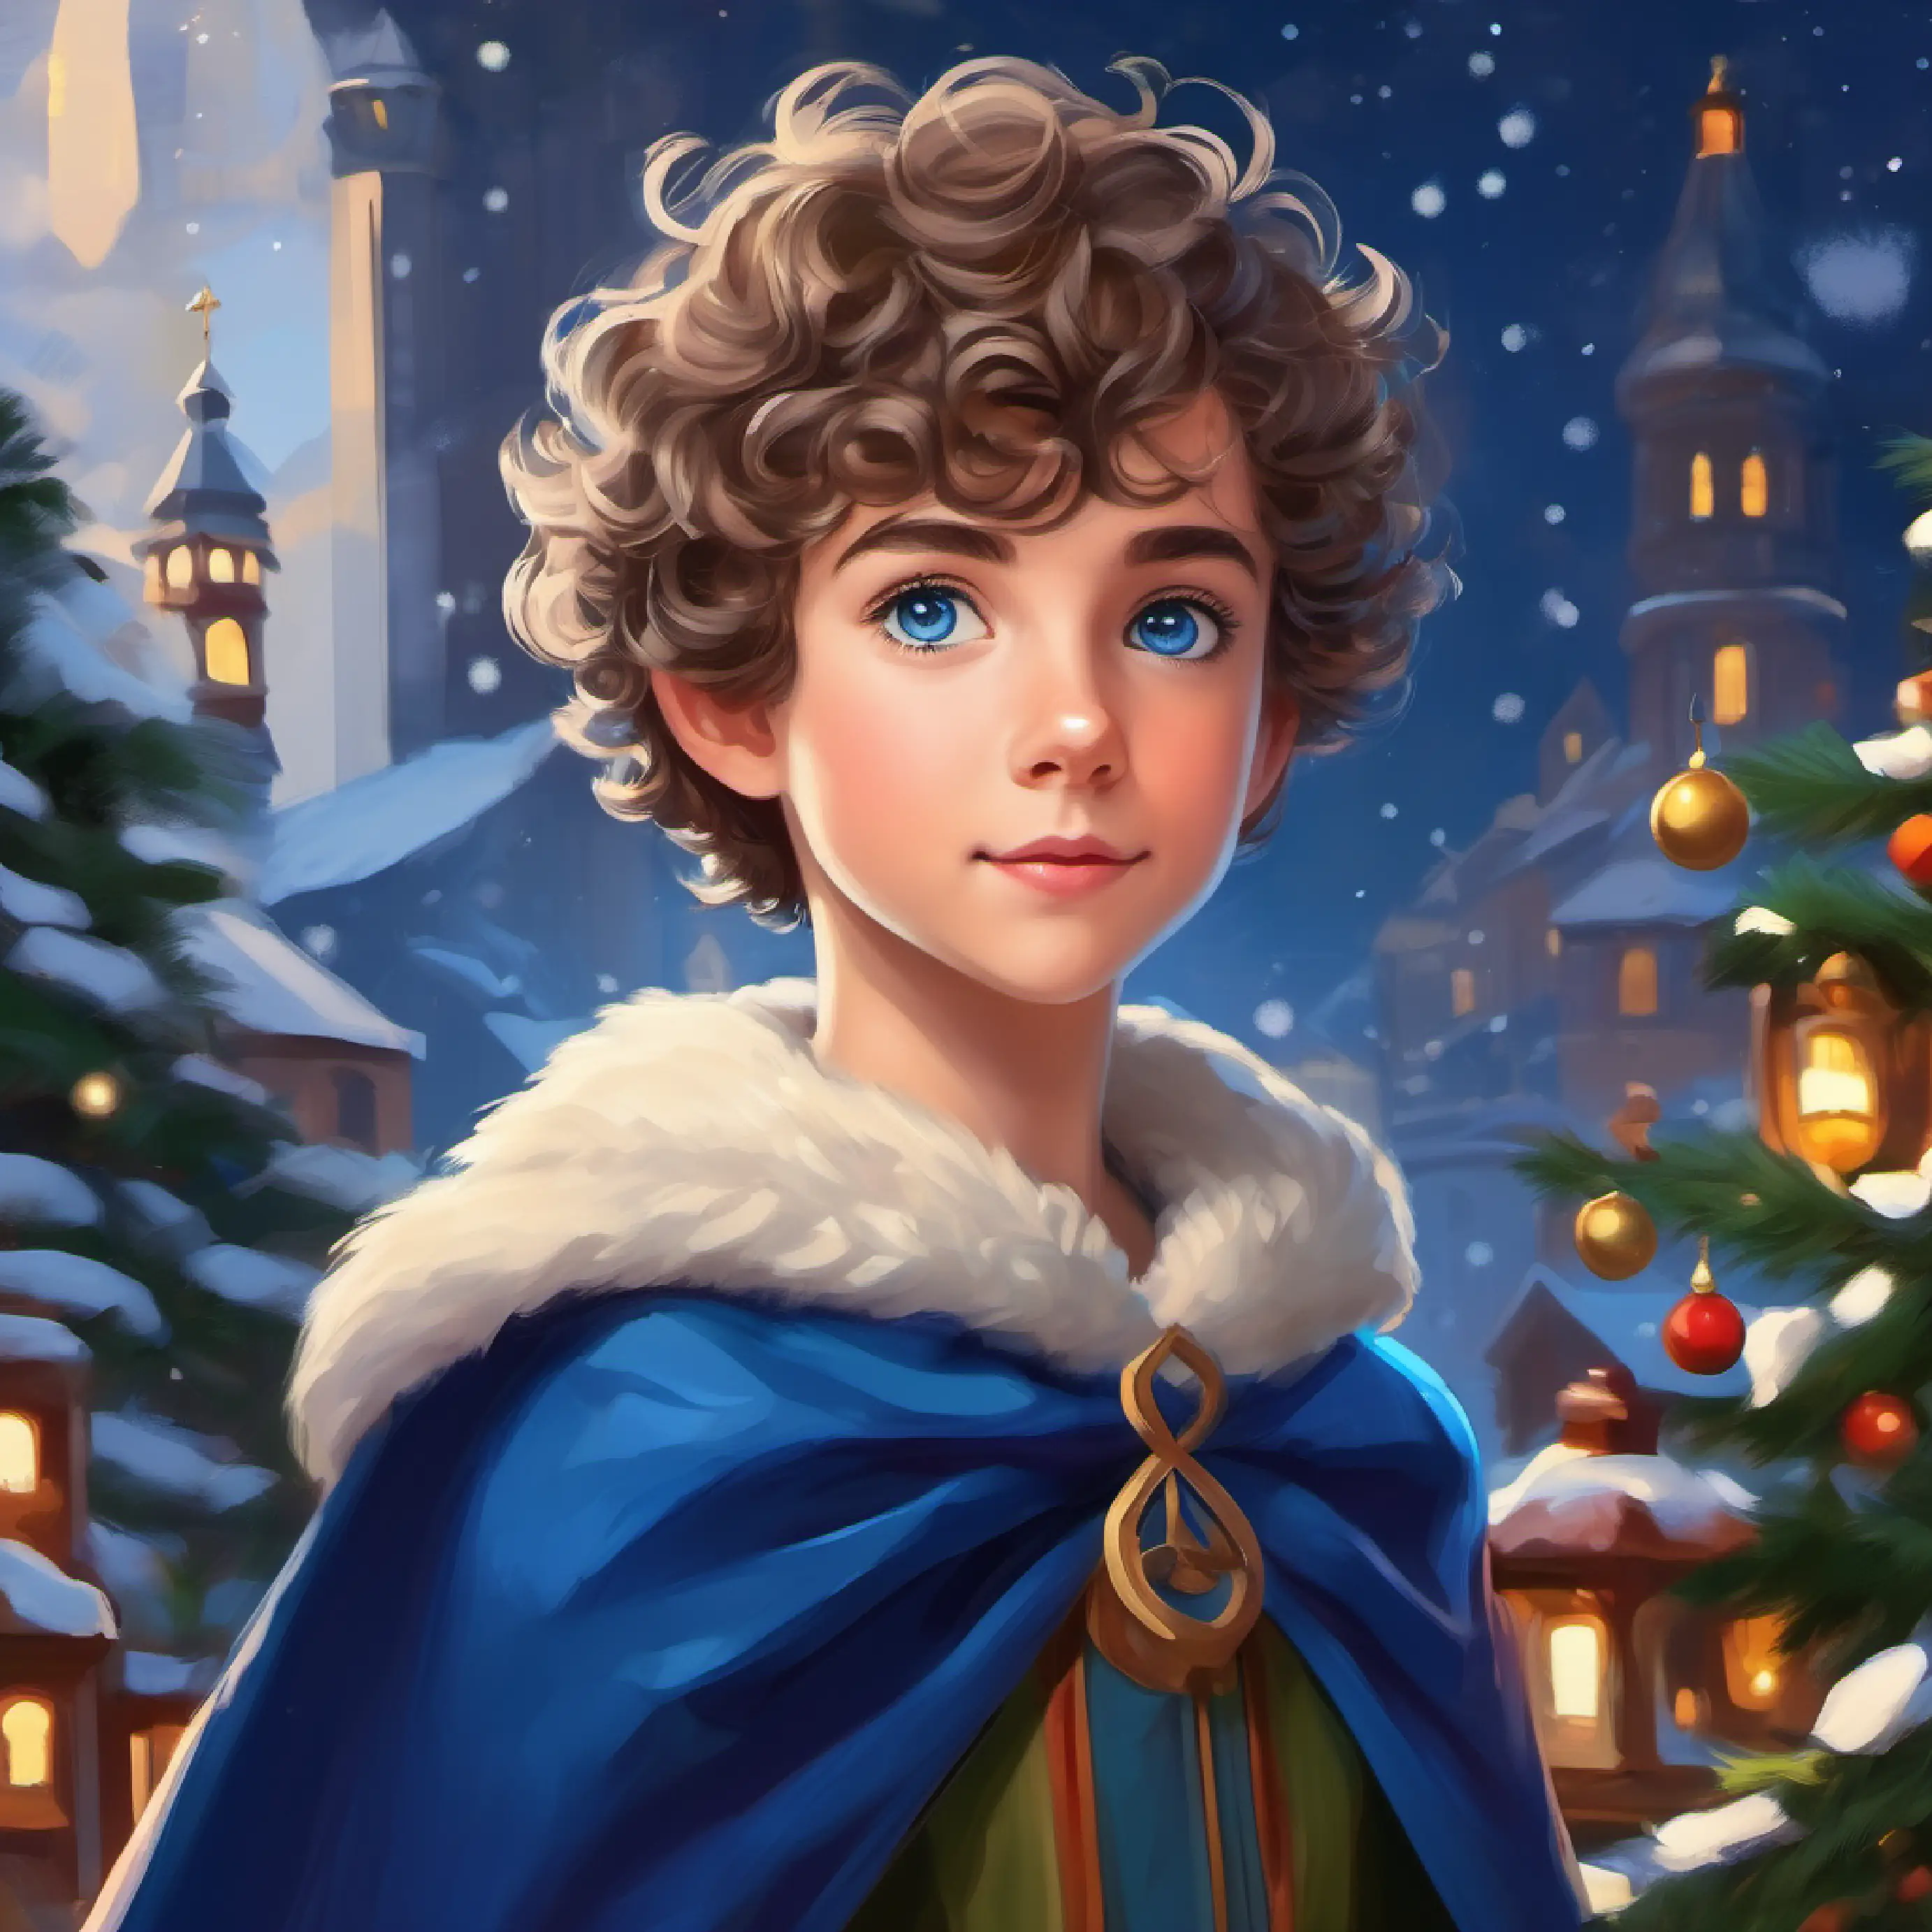 Beginning of Short, curly hair, bright blue eyes, wearing a cape' imaginative adventure